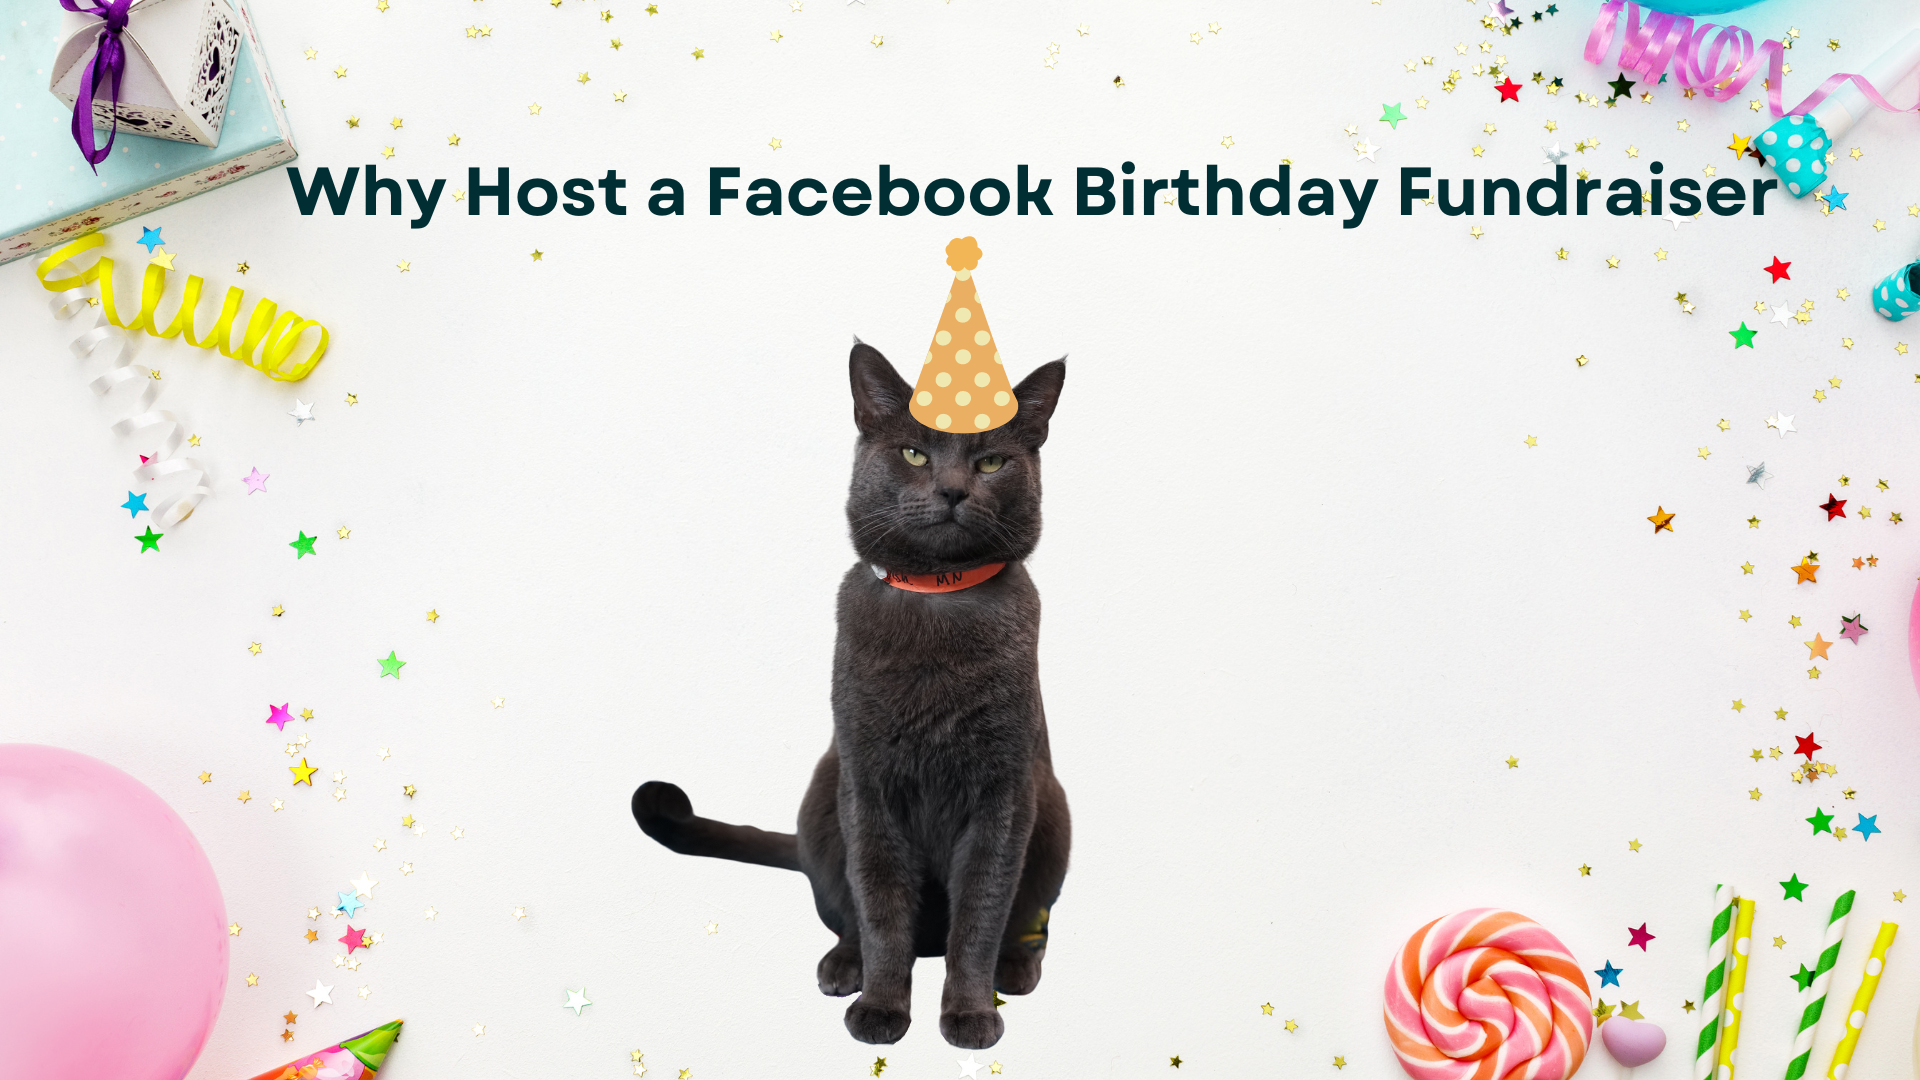 Celebrate Your Birthday with the Cats: Why Host a Facebook Fundraiser